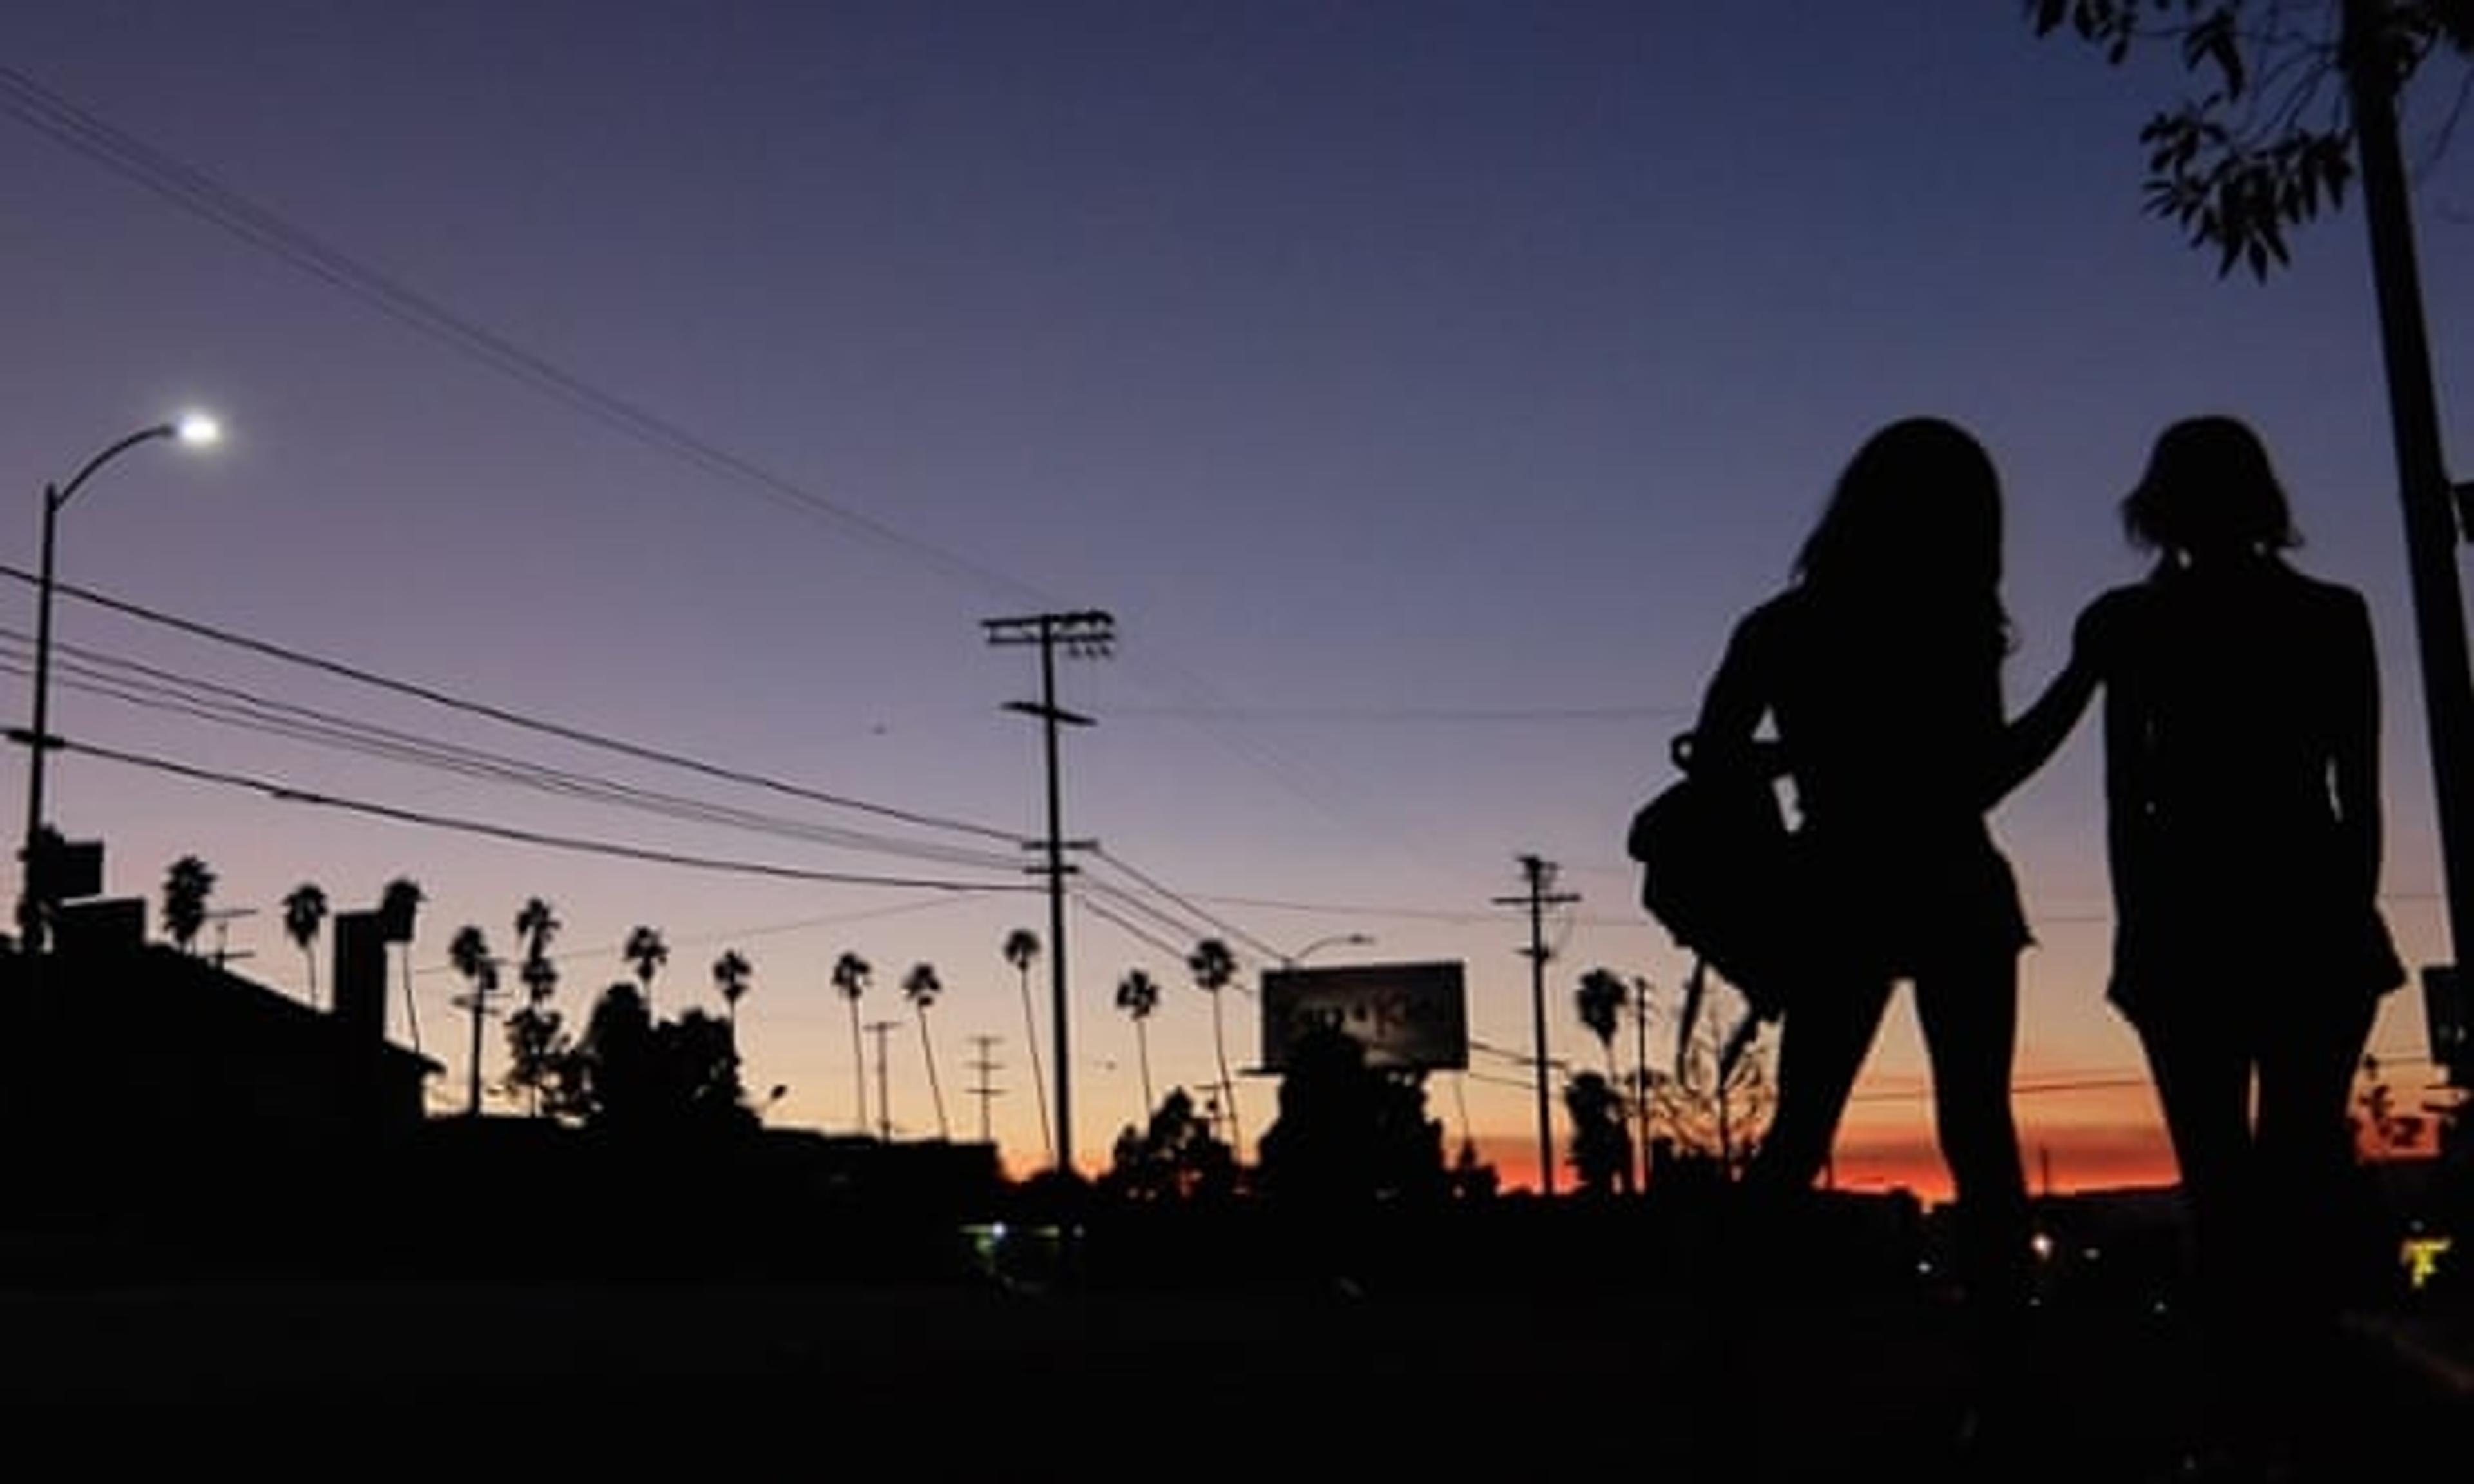 An image from Tangerine (2015).